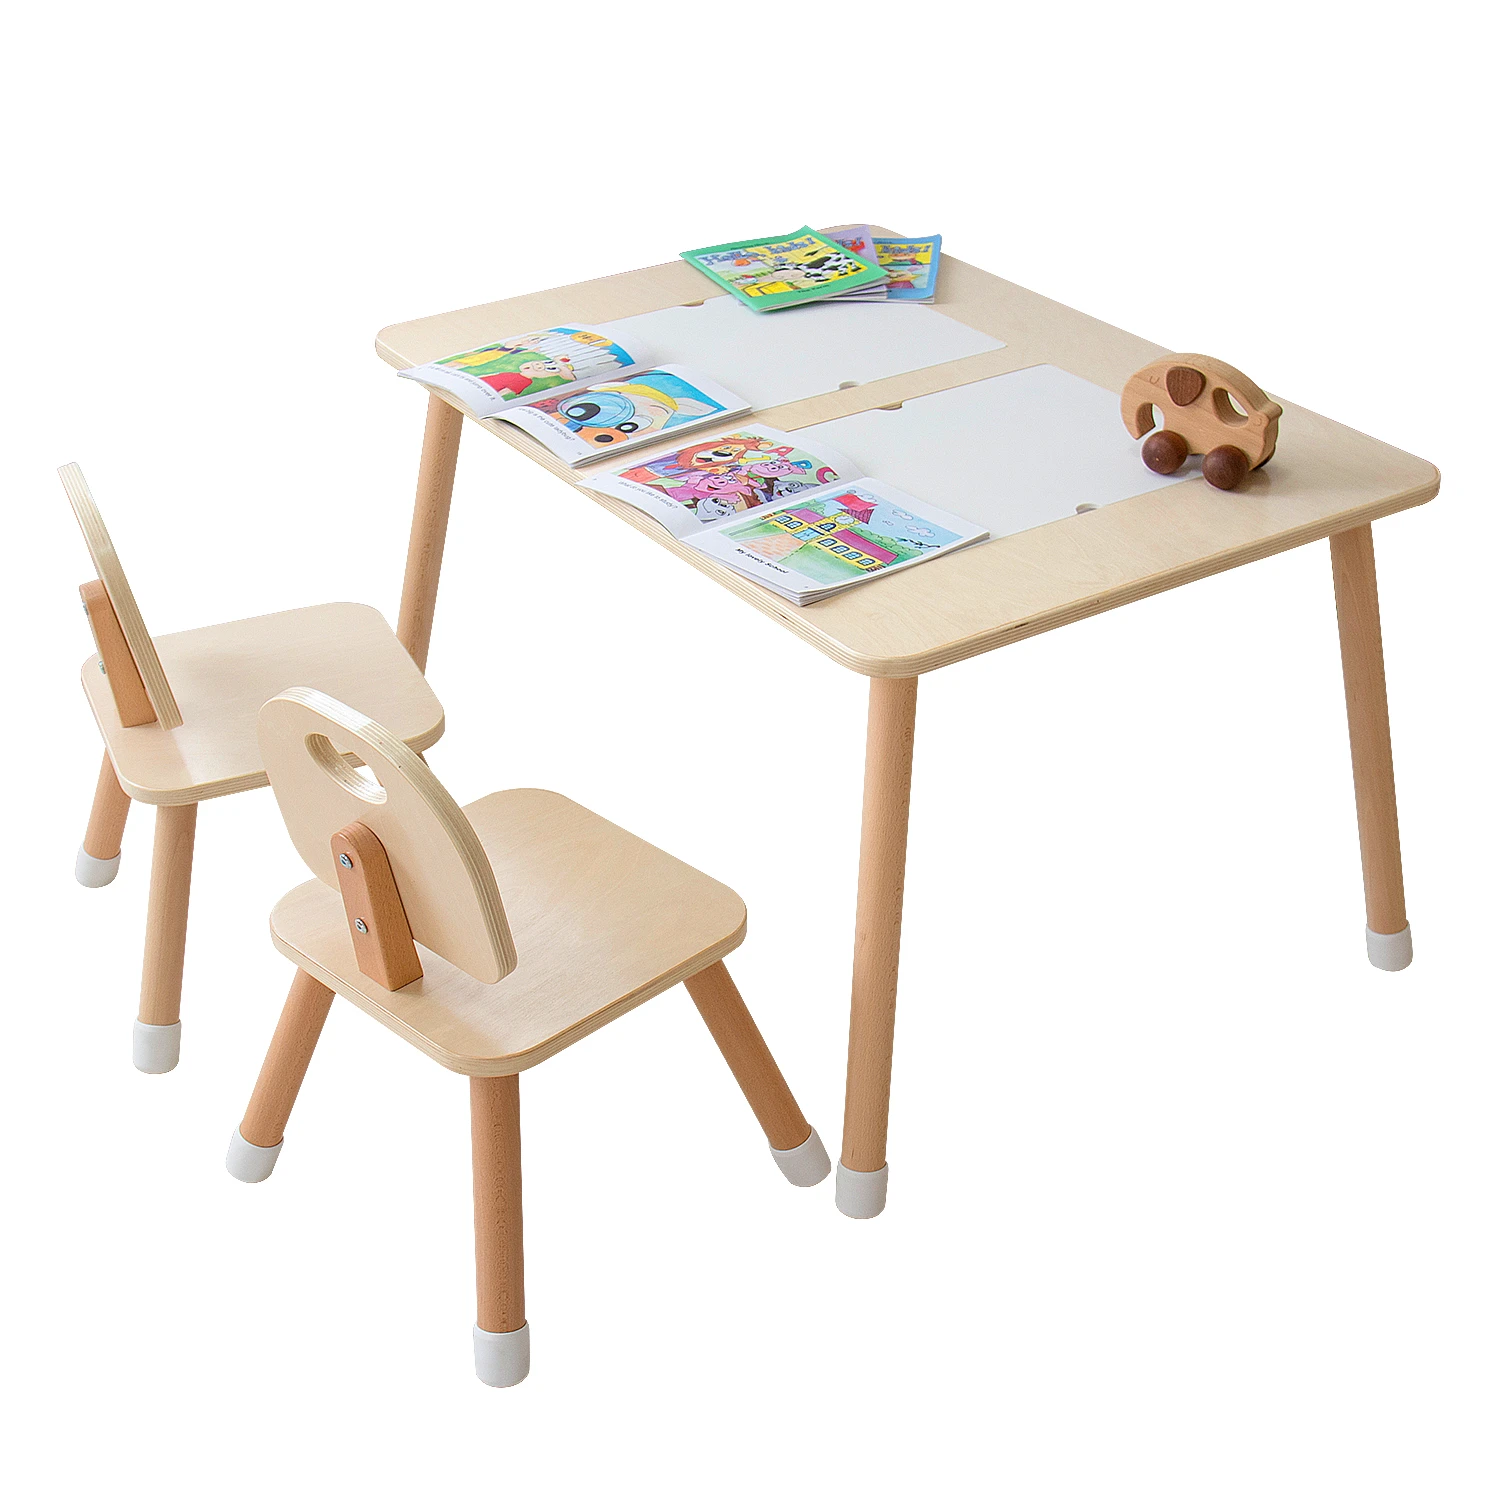 Children furniture table with 2 plastic storage box kids activity table kids toy storage table